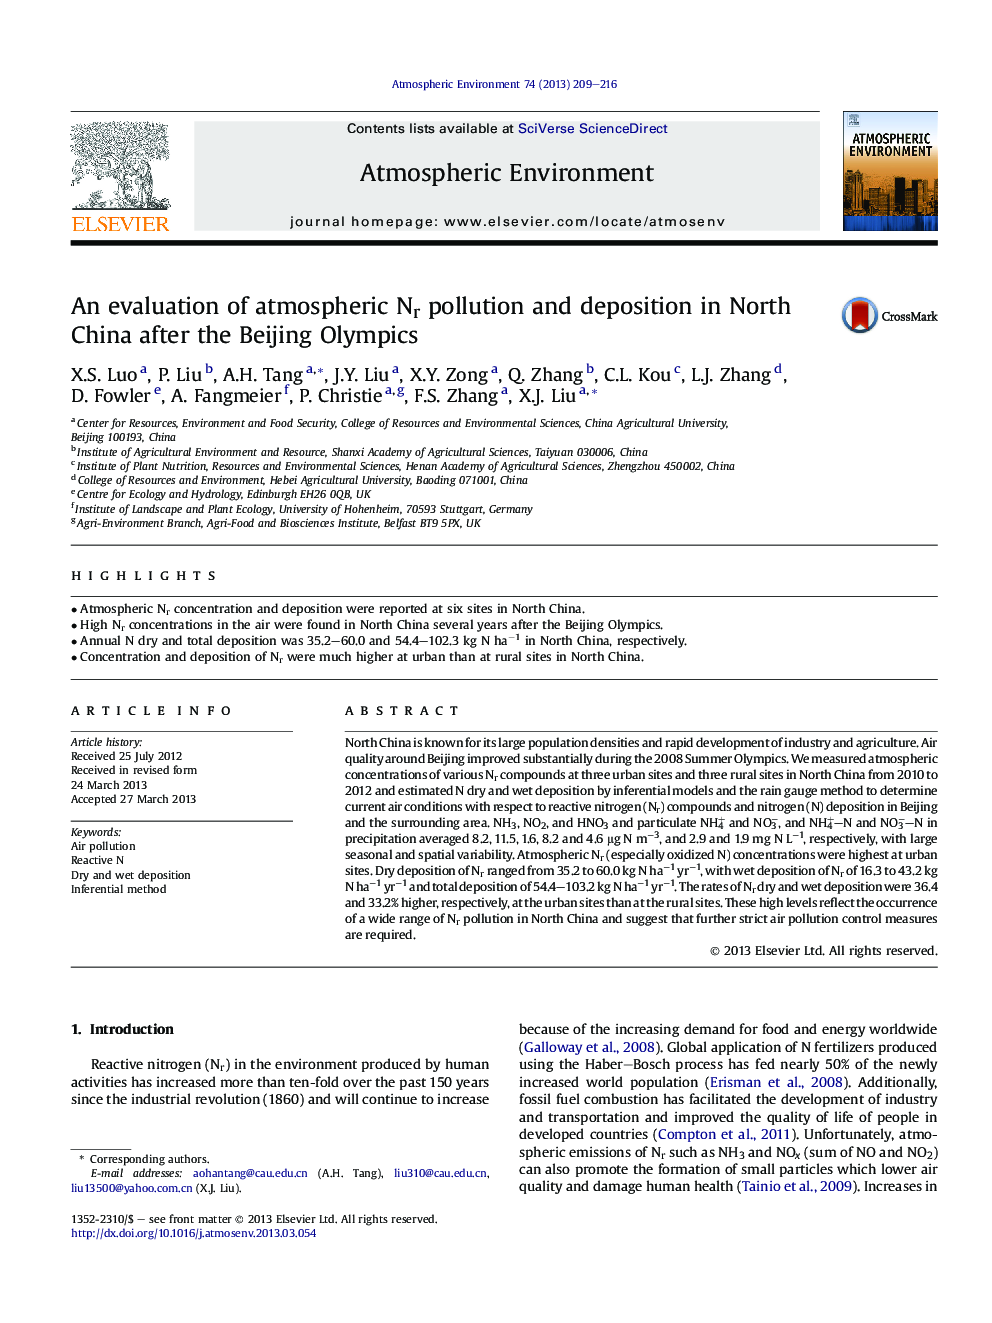 An evaluation of atmospheric Nr pollution and deposition in North China after the Beijing Olympics